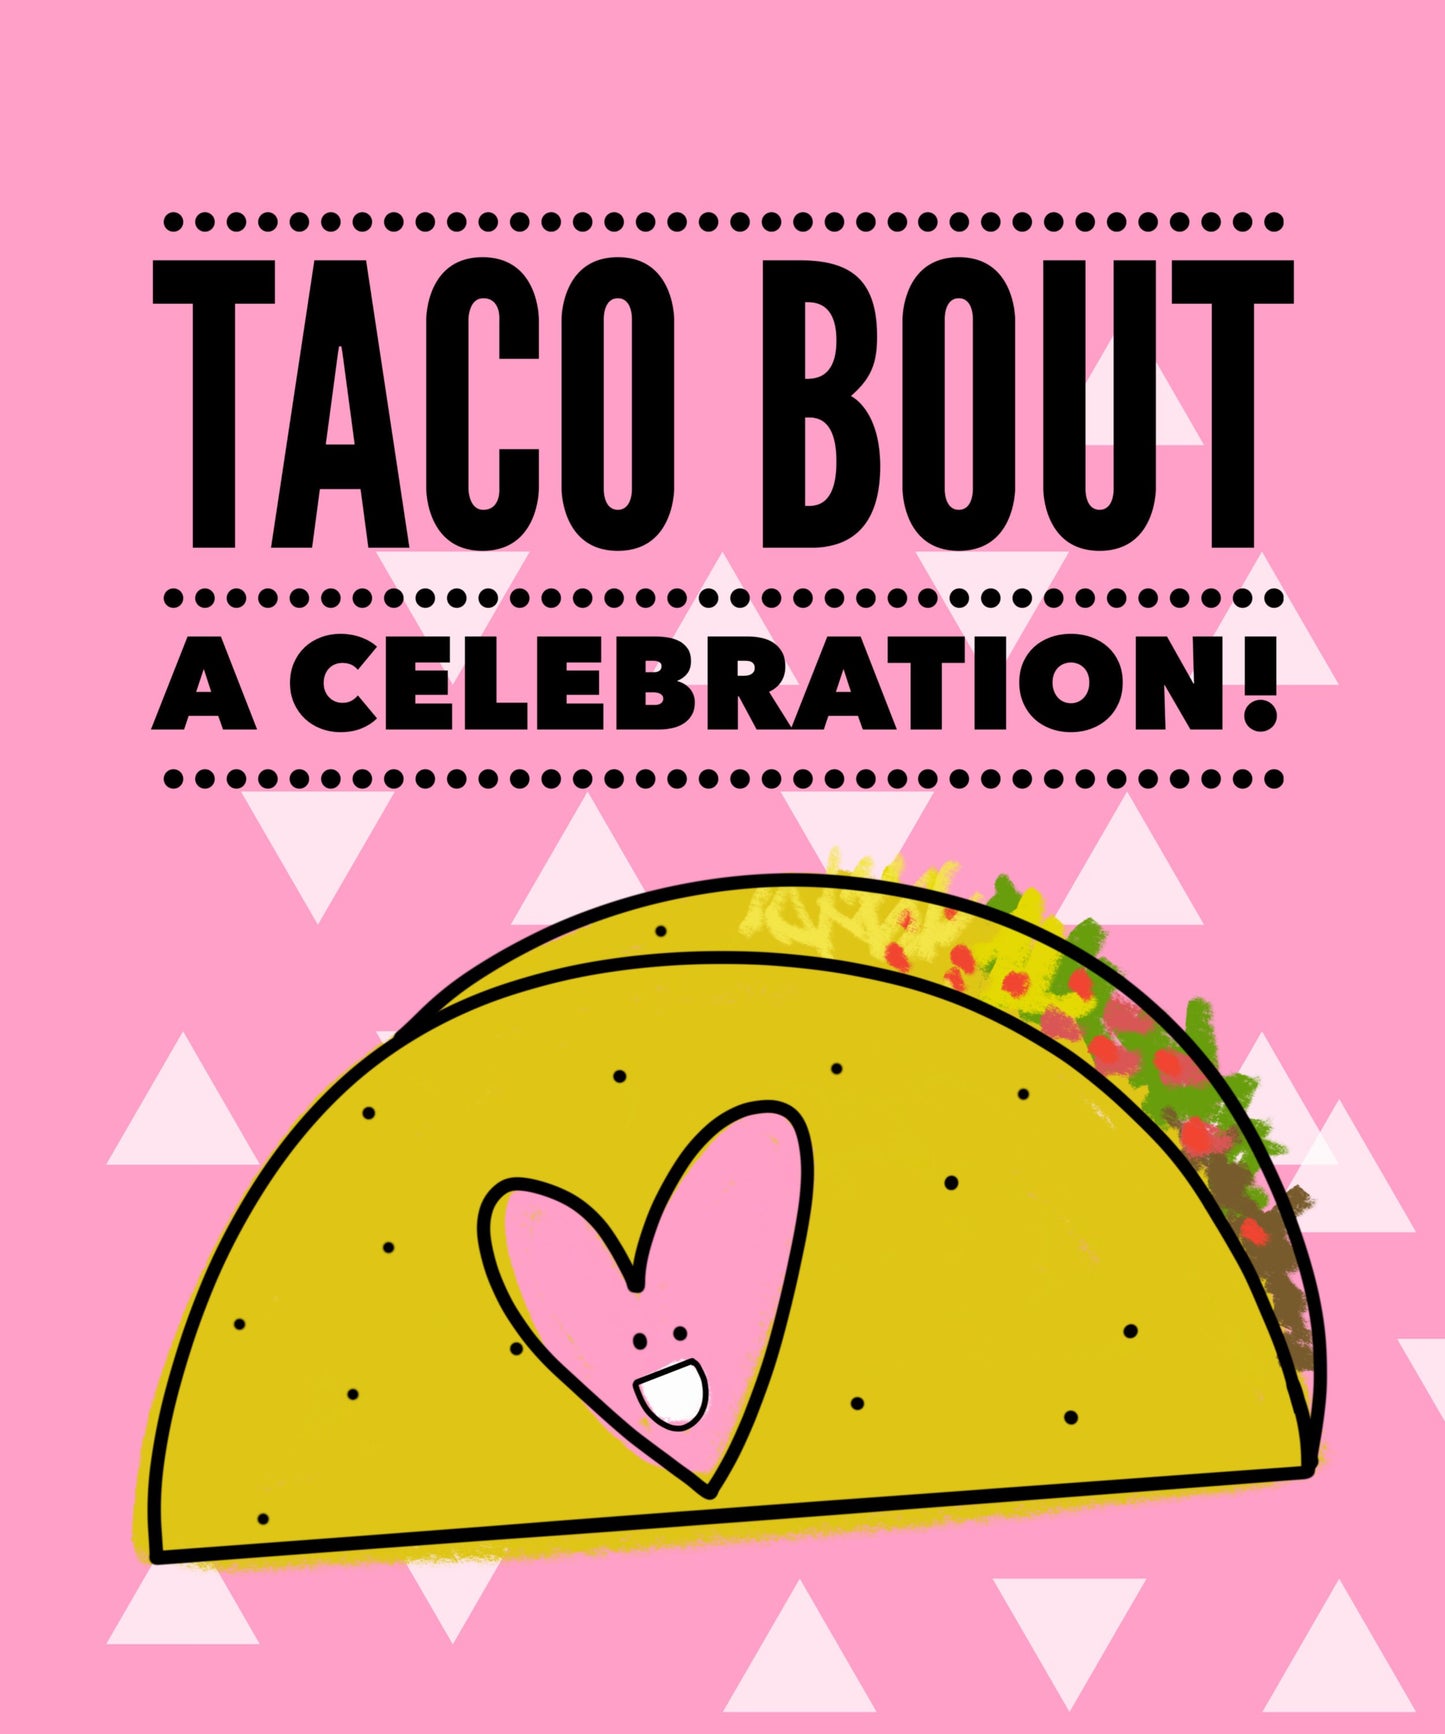 3 Pk Taco Bout a Celebration | Punny Taco Birthday Celebration Card + Envelope | Blank Inside | Cute Pun Greeting Card | 5.5X4.2 Inches